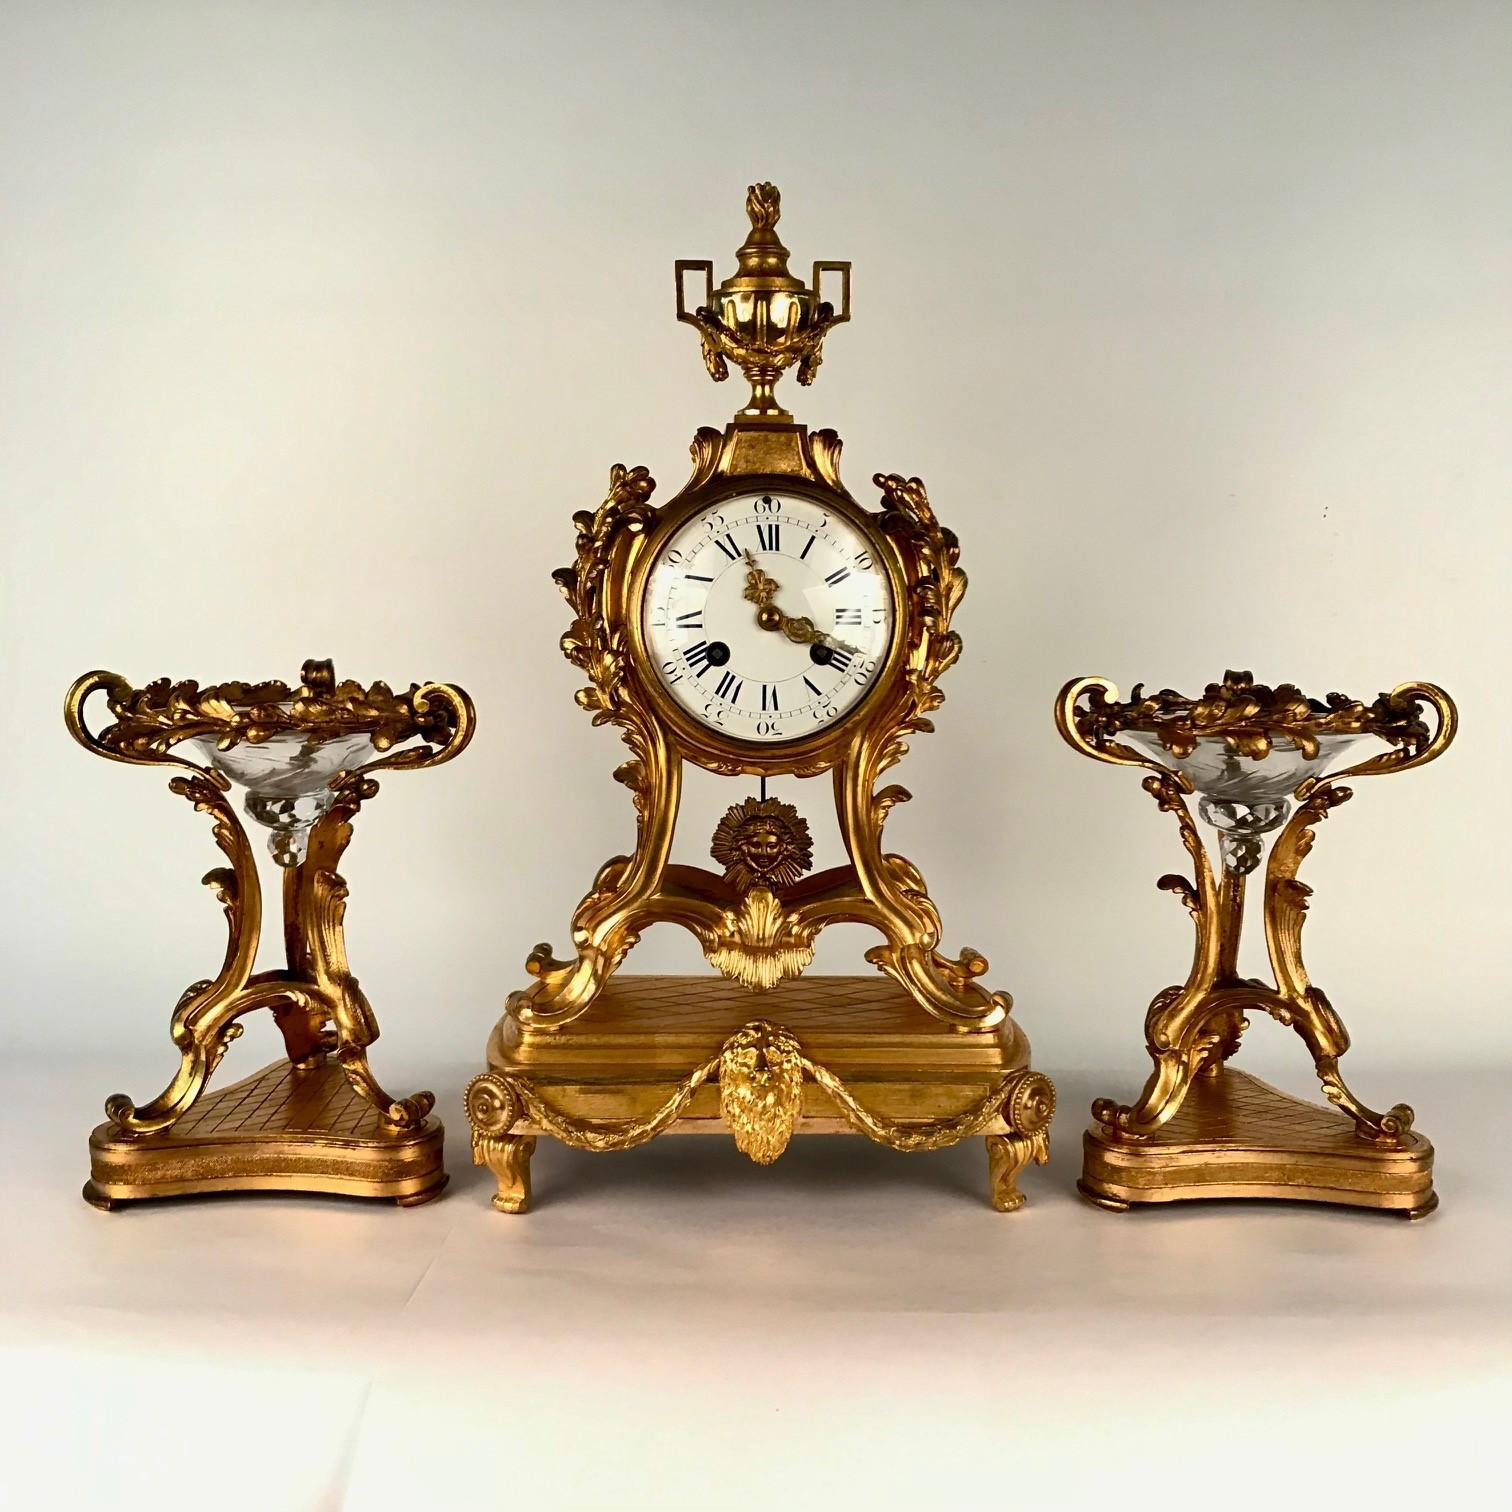 This fine garniture is of the spirit and period of the Belle Epoque It is certainly Belle, the barrel movement is supported by an extremely elegant acanthus and leaf-form frame, and surmounted by a classical vase with draping swag. The pendulum is